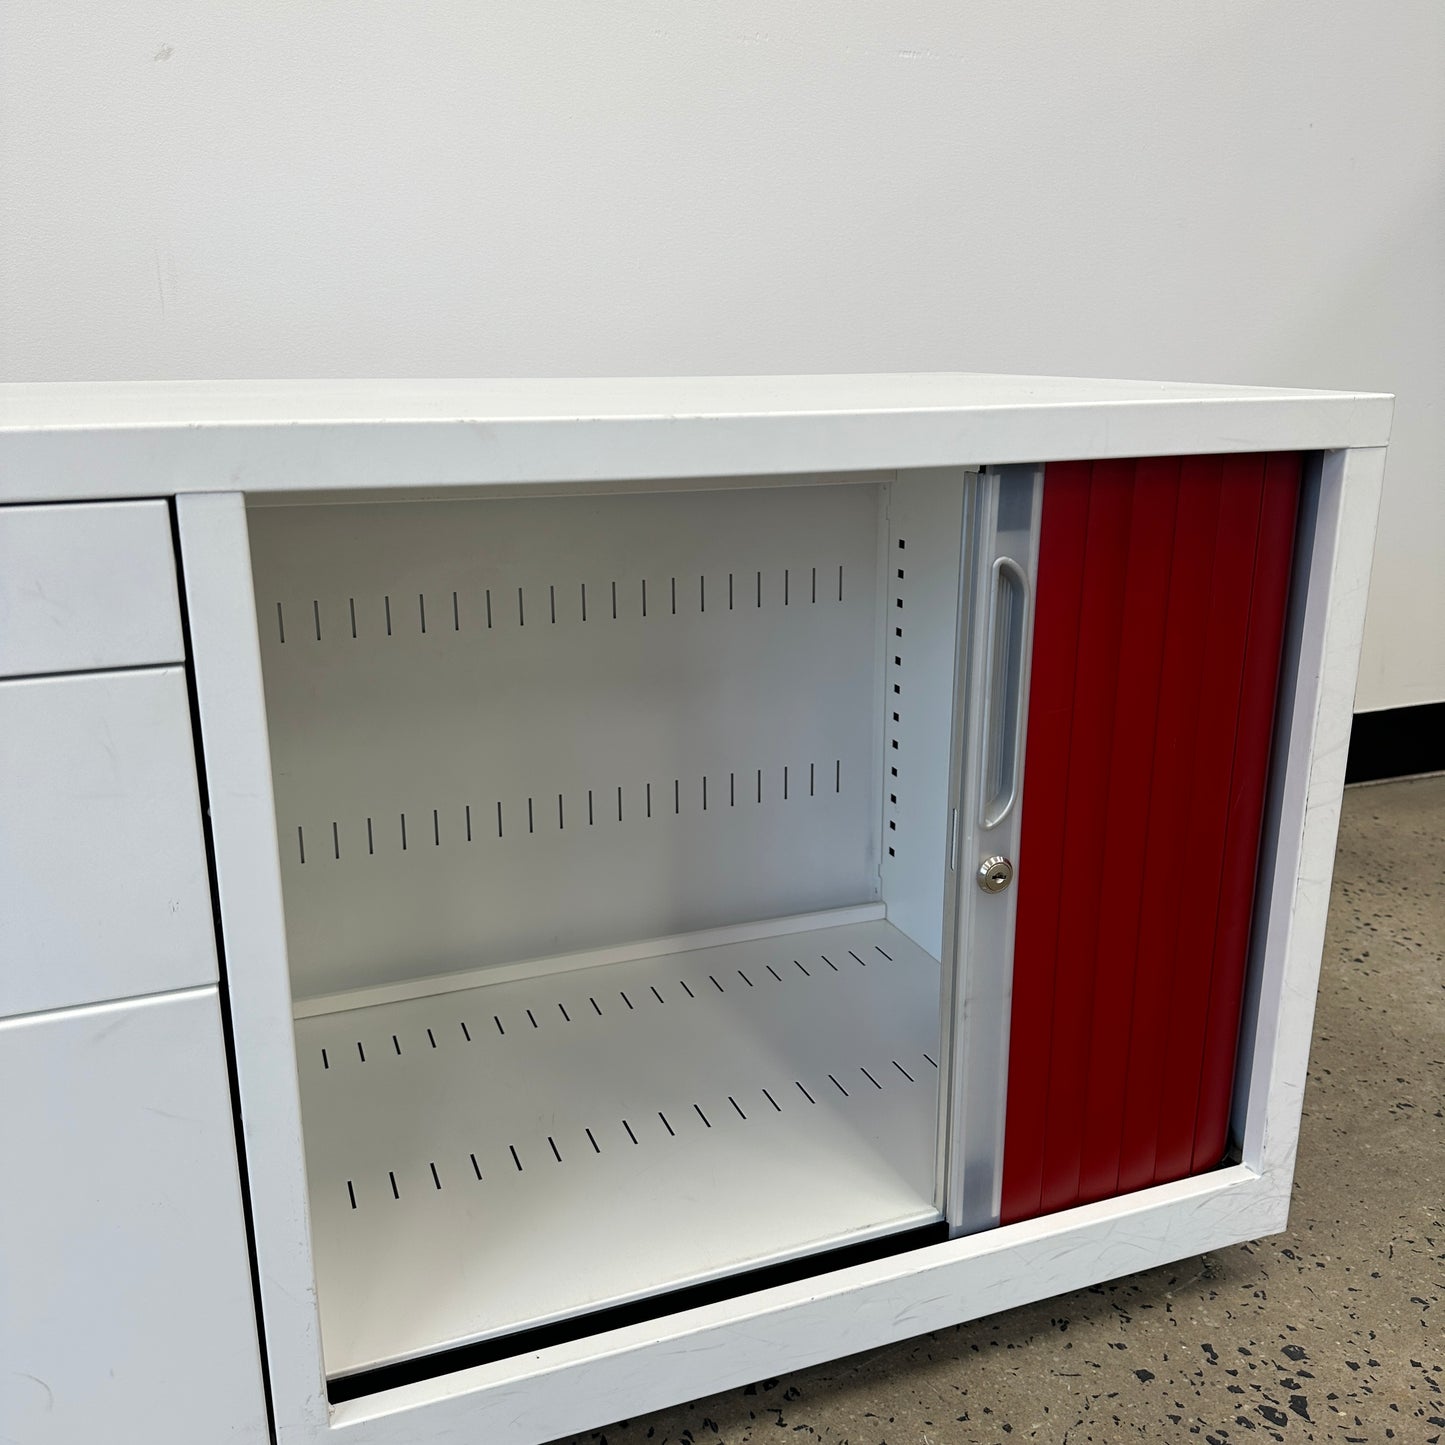 Tambour Pedestal Cabinet White and Red